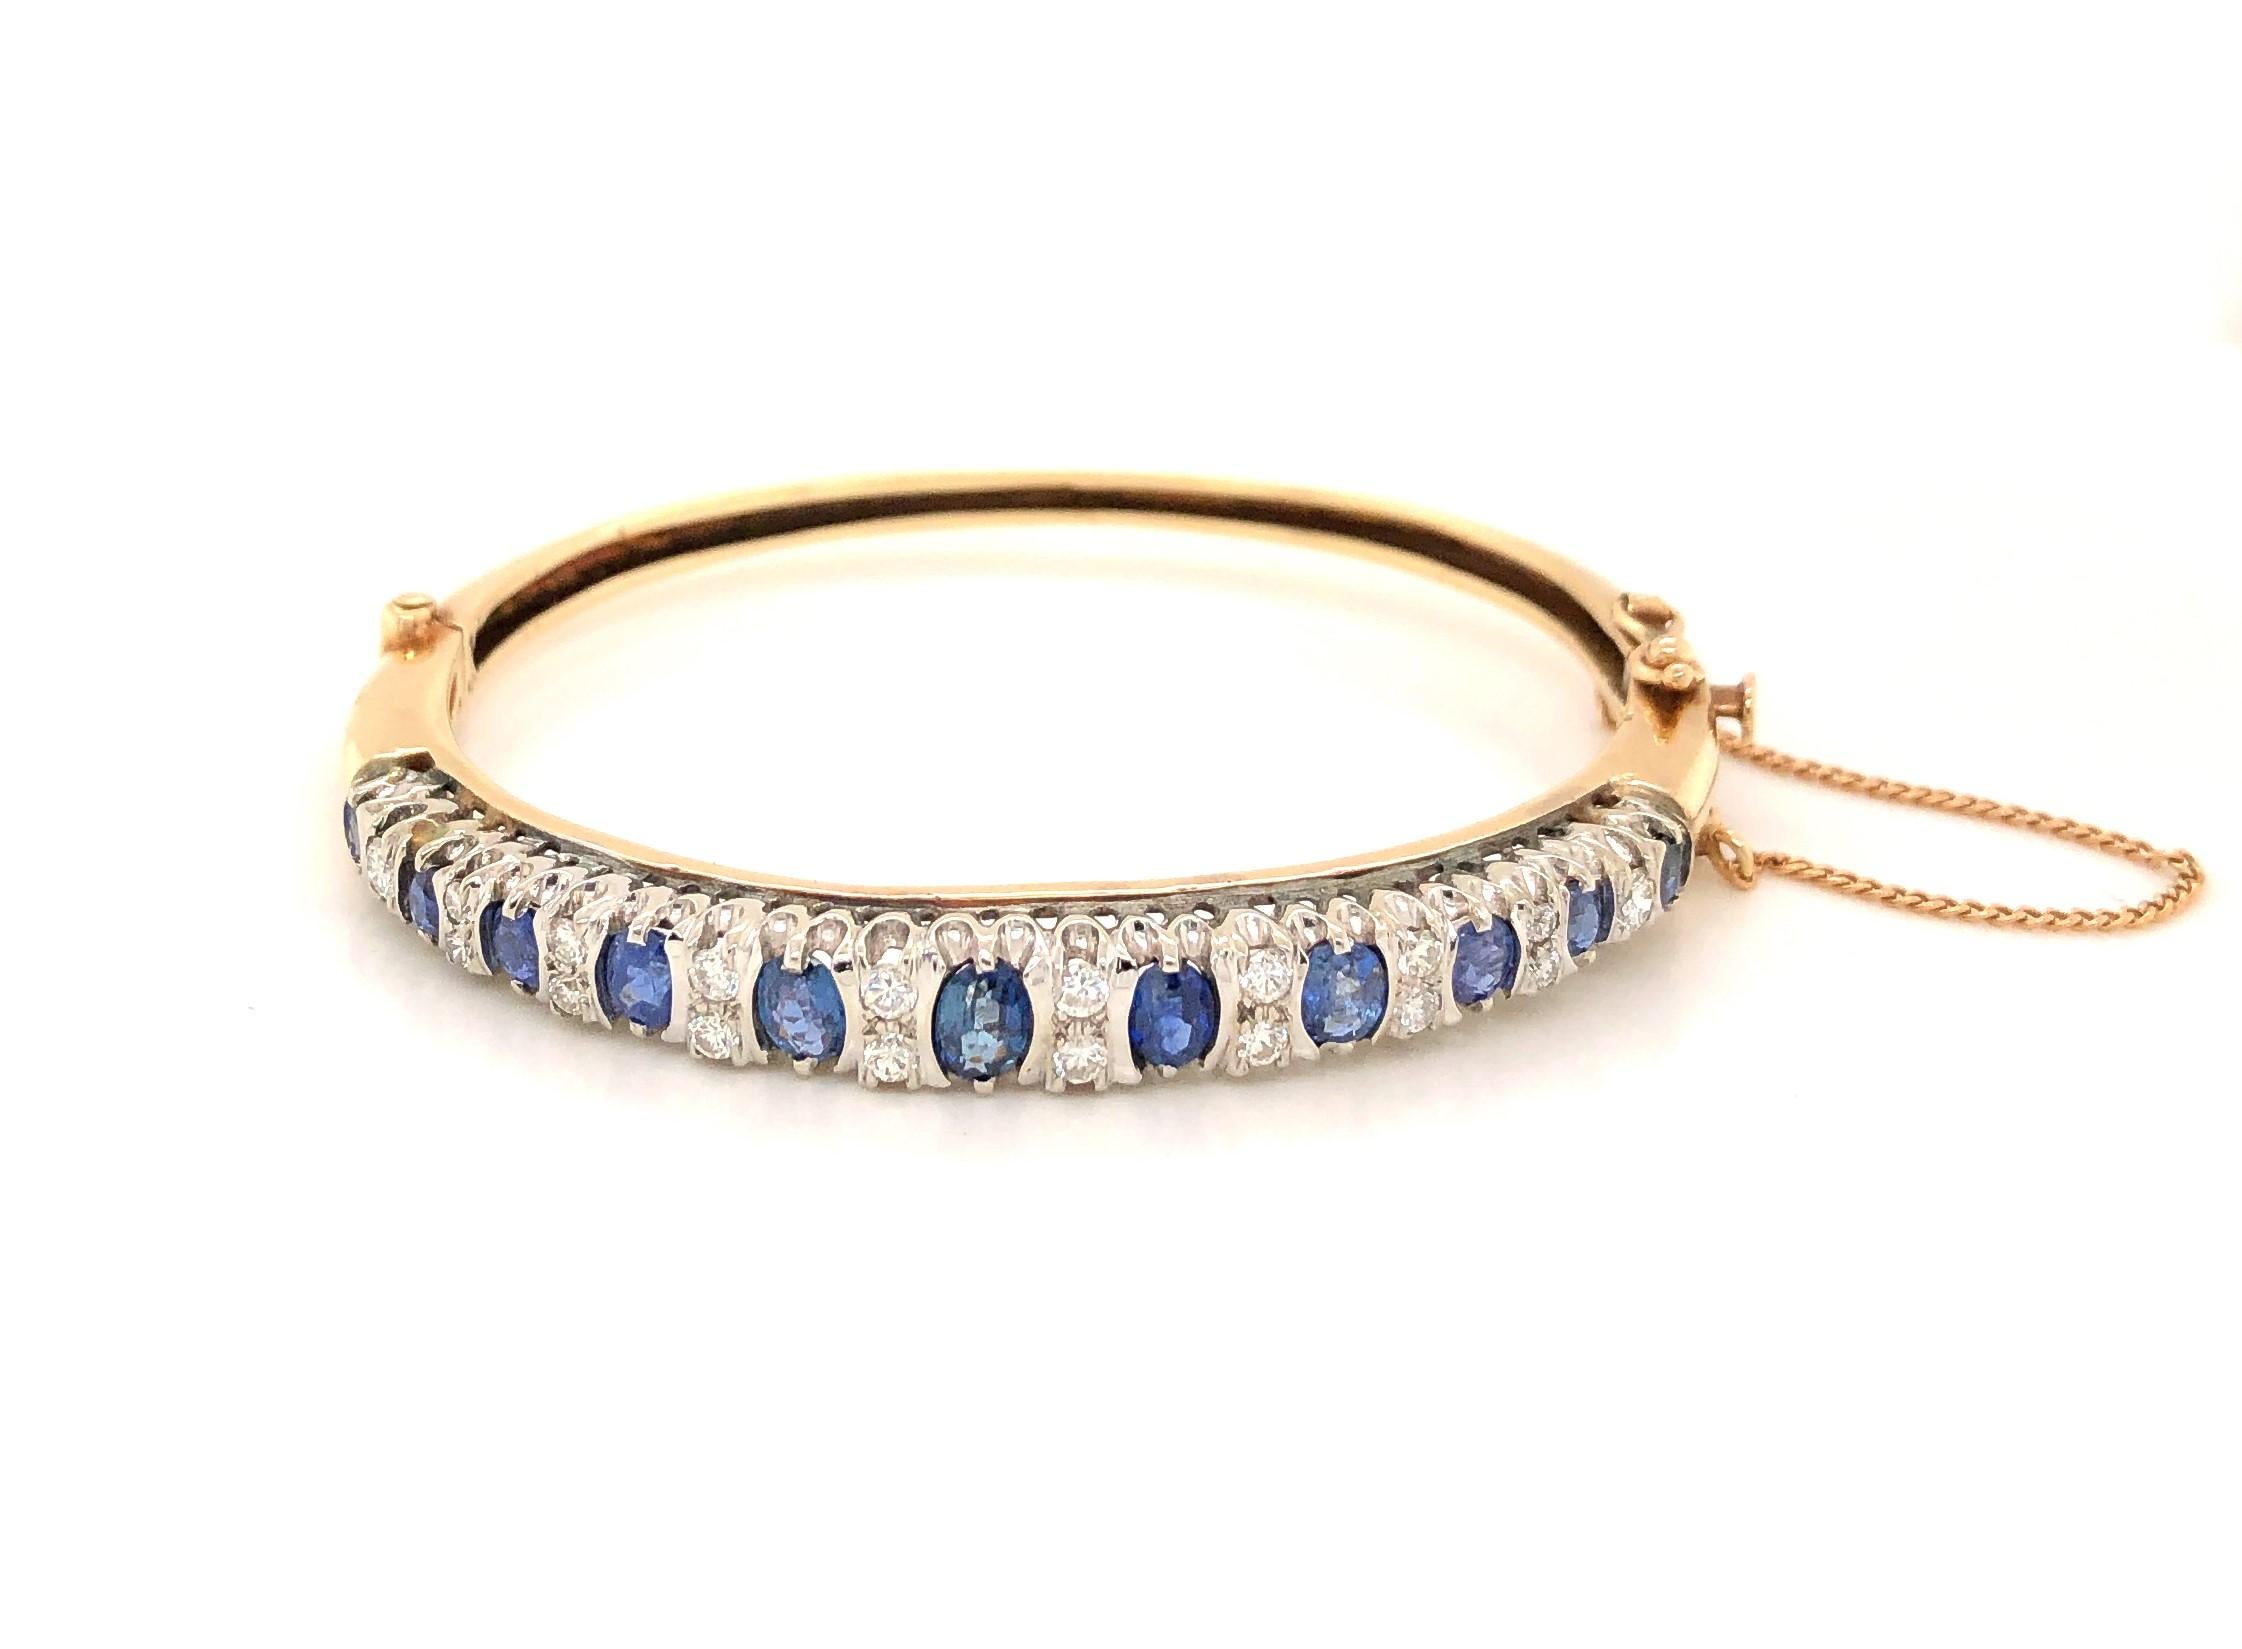 Over a half carat of oval facet cut vibrant blue natural sapphire complemented by eighteen individually set sparking round white faceted diamonds, with a total weight of .44 carats. create an exciting display as they graduate along the front of this